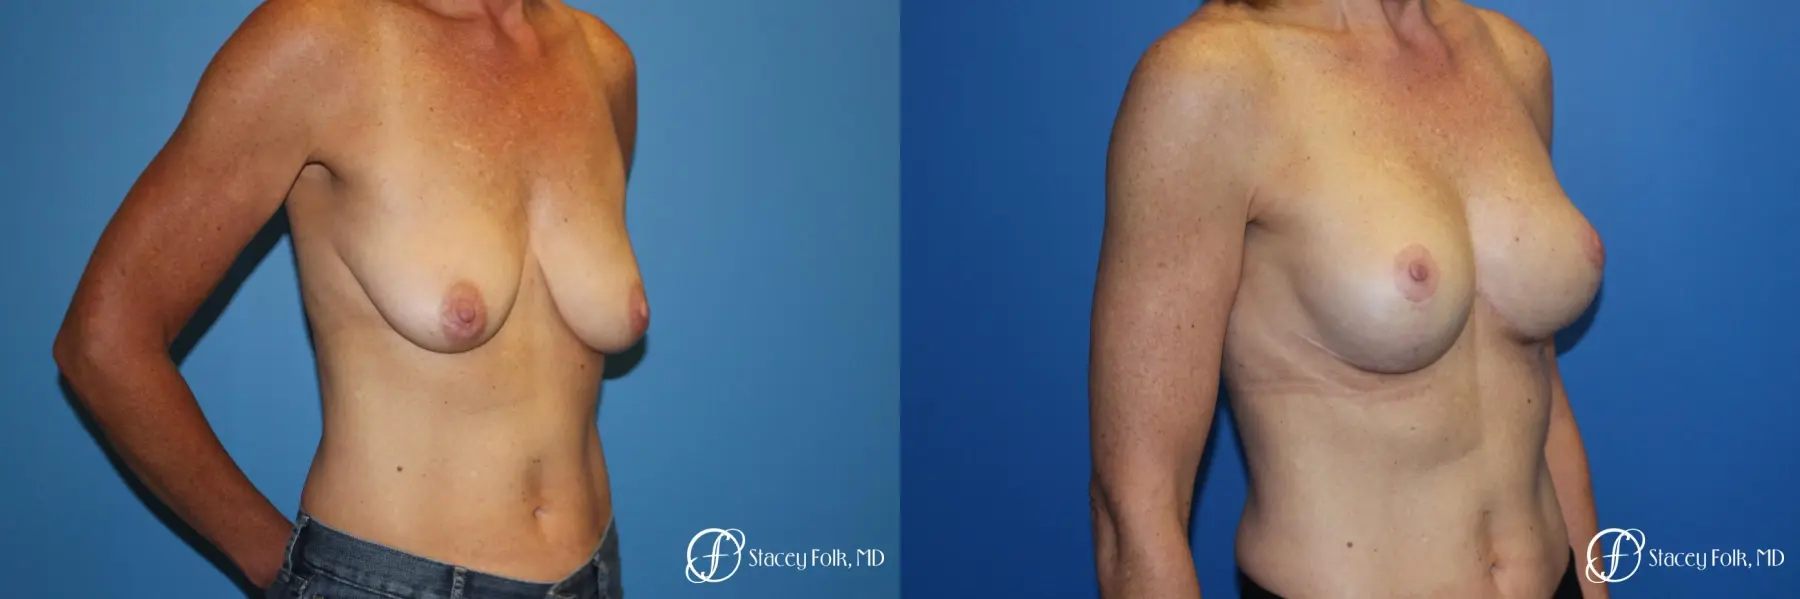 Breast Augmentation with Breast Lift (Augmentation/Mastopexy) - Before and After 2